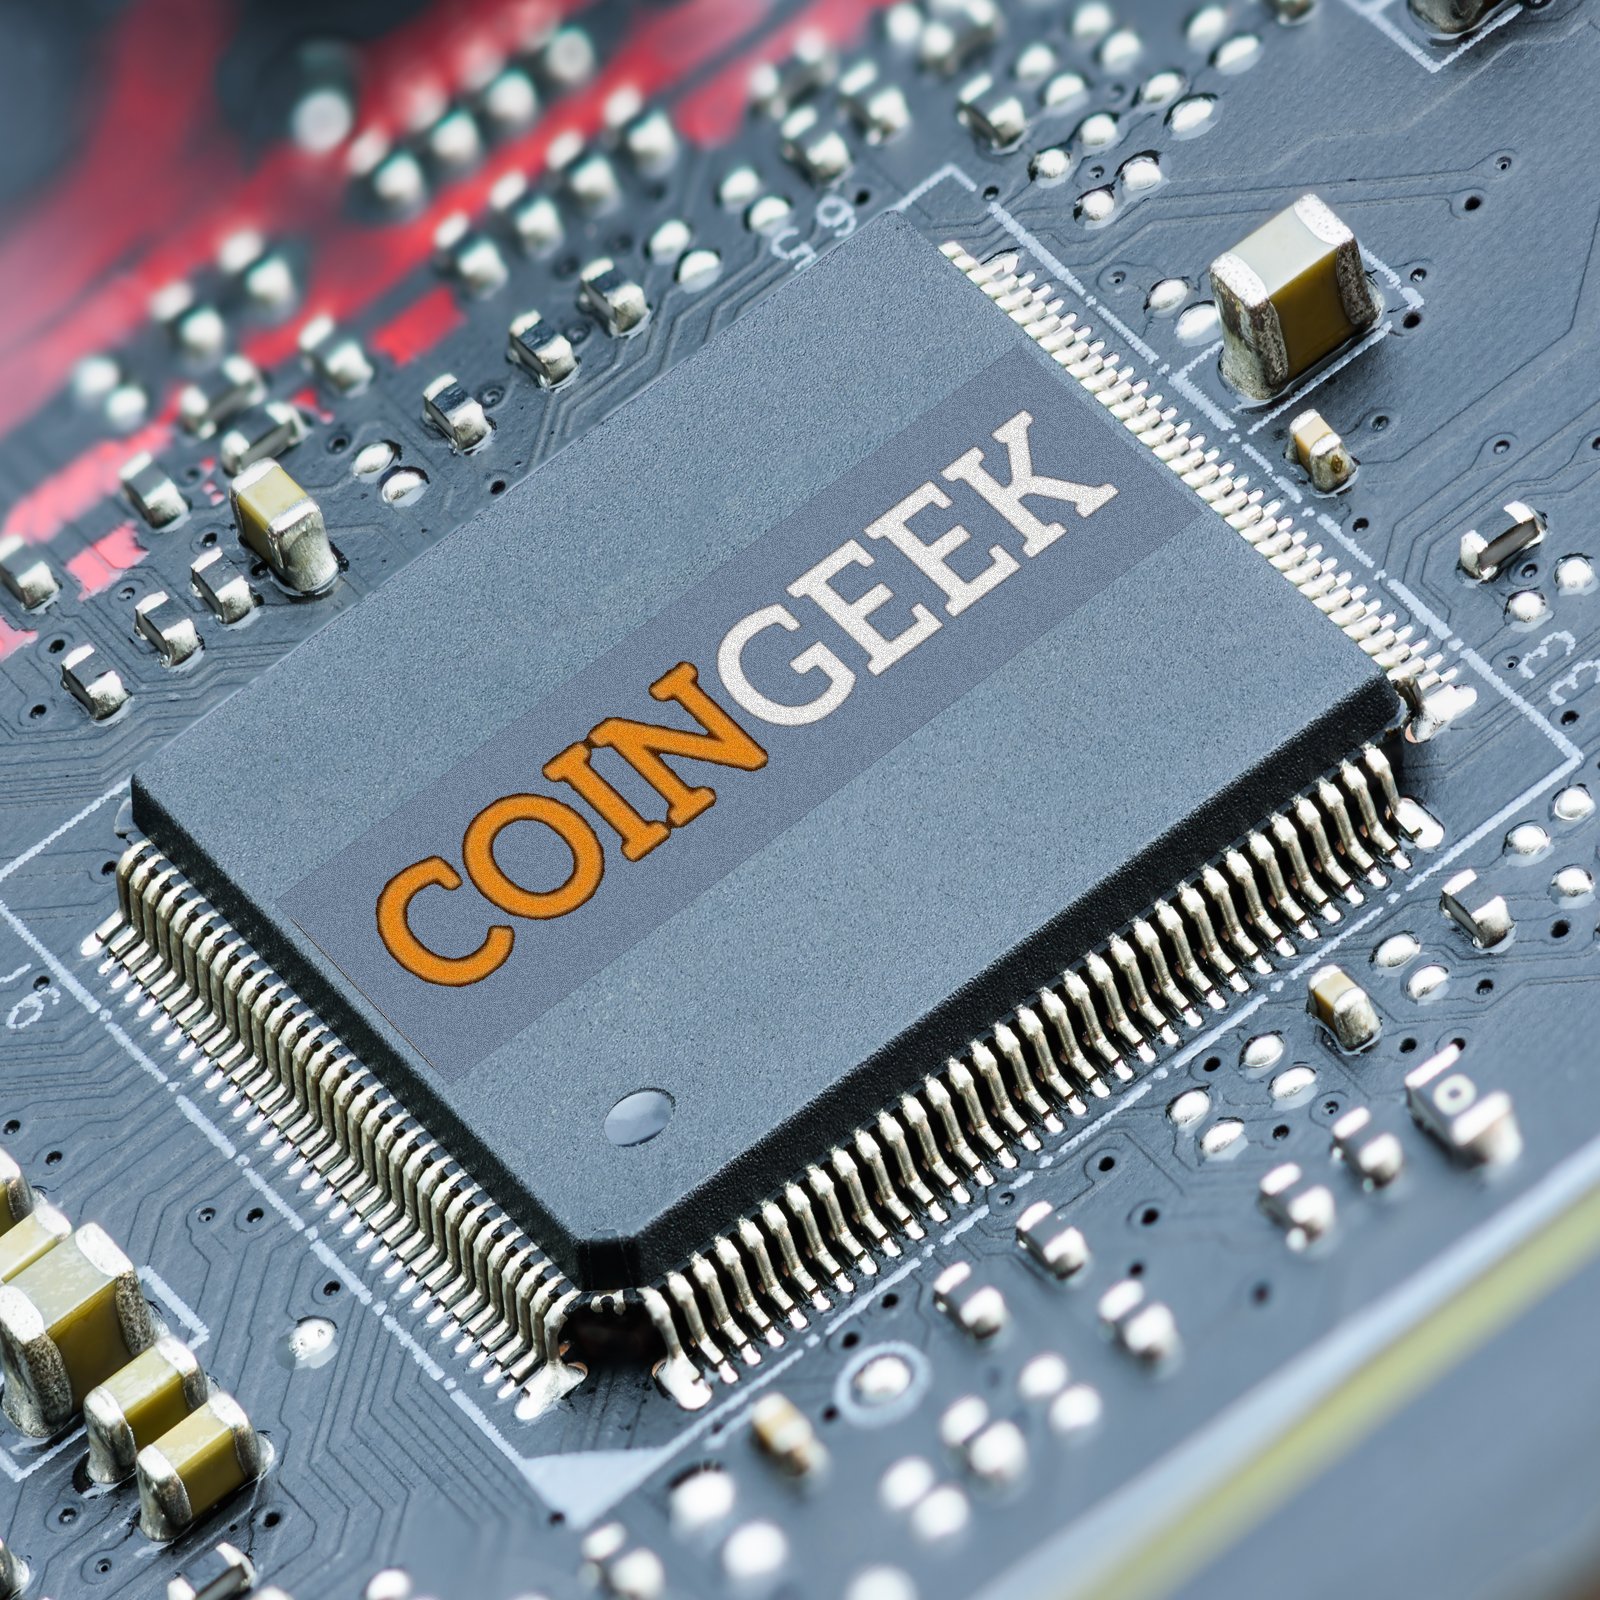 Squire Partnership Gives Coingeek Exclusive Rights to 10nm ASIC Chip